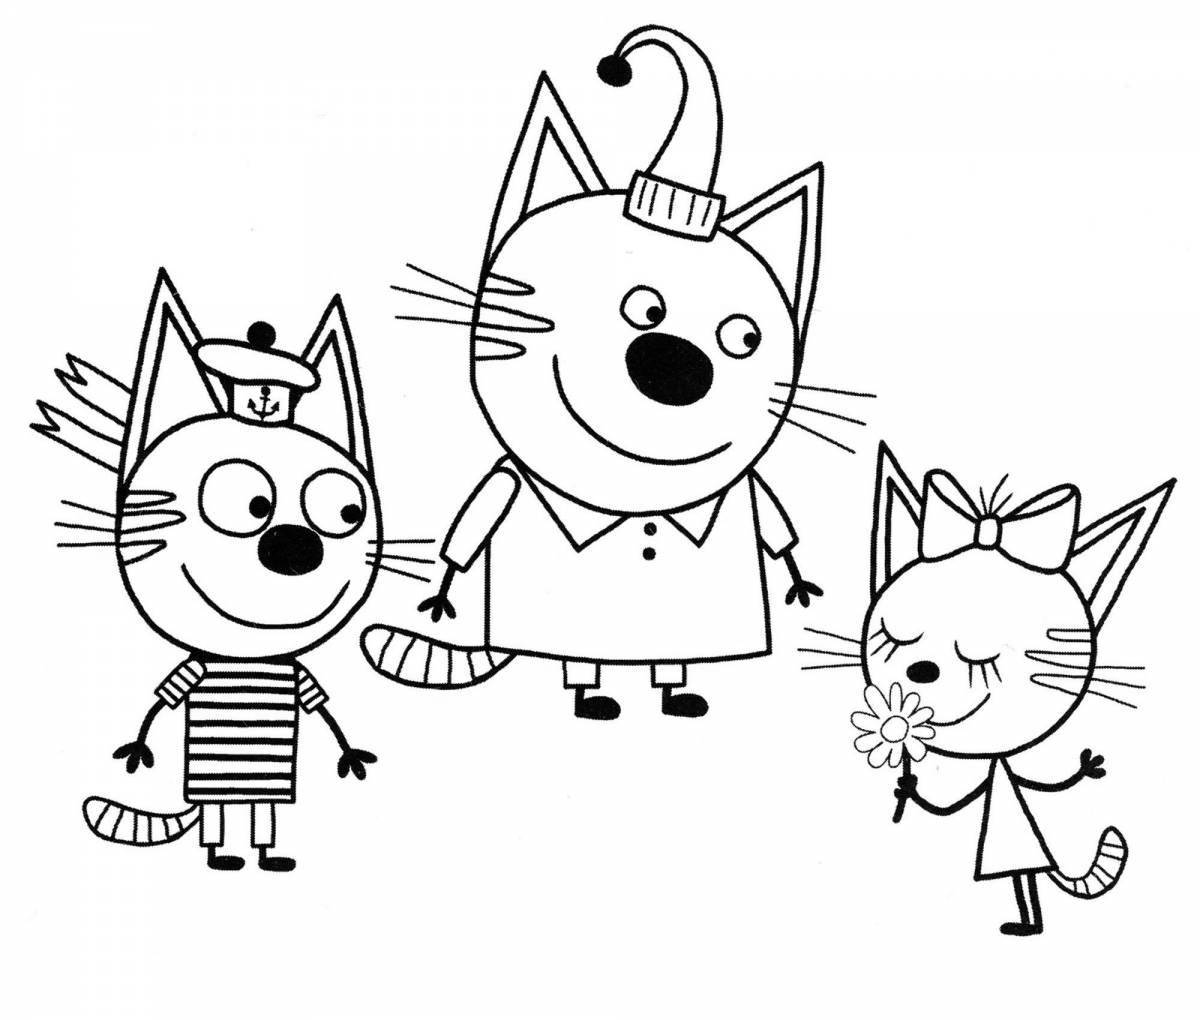 Delightful three-cat family coloring book